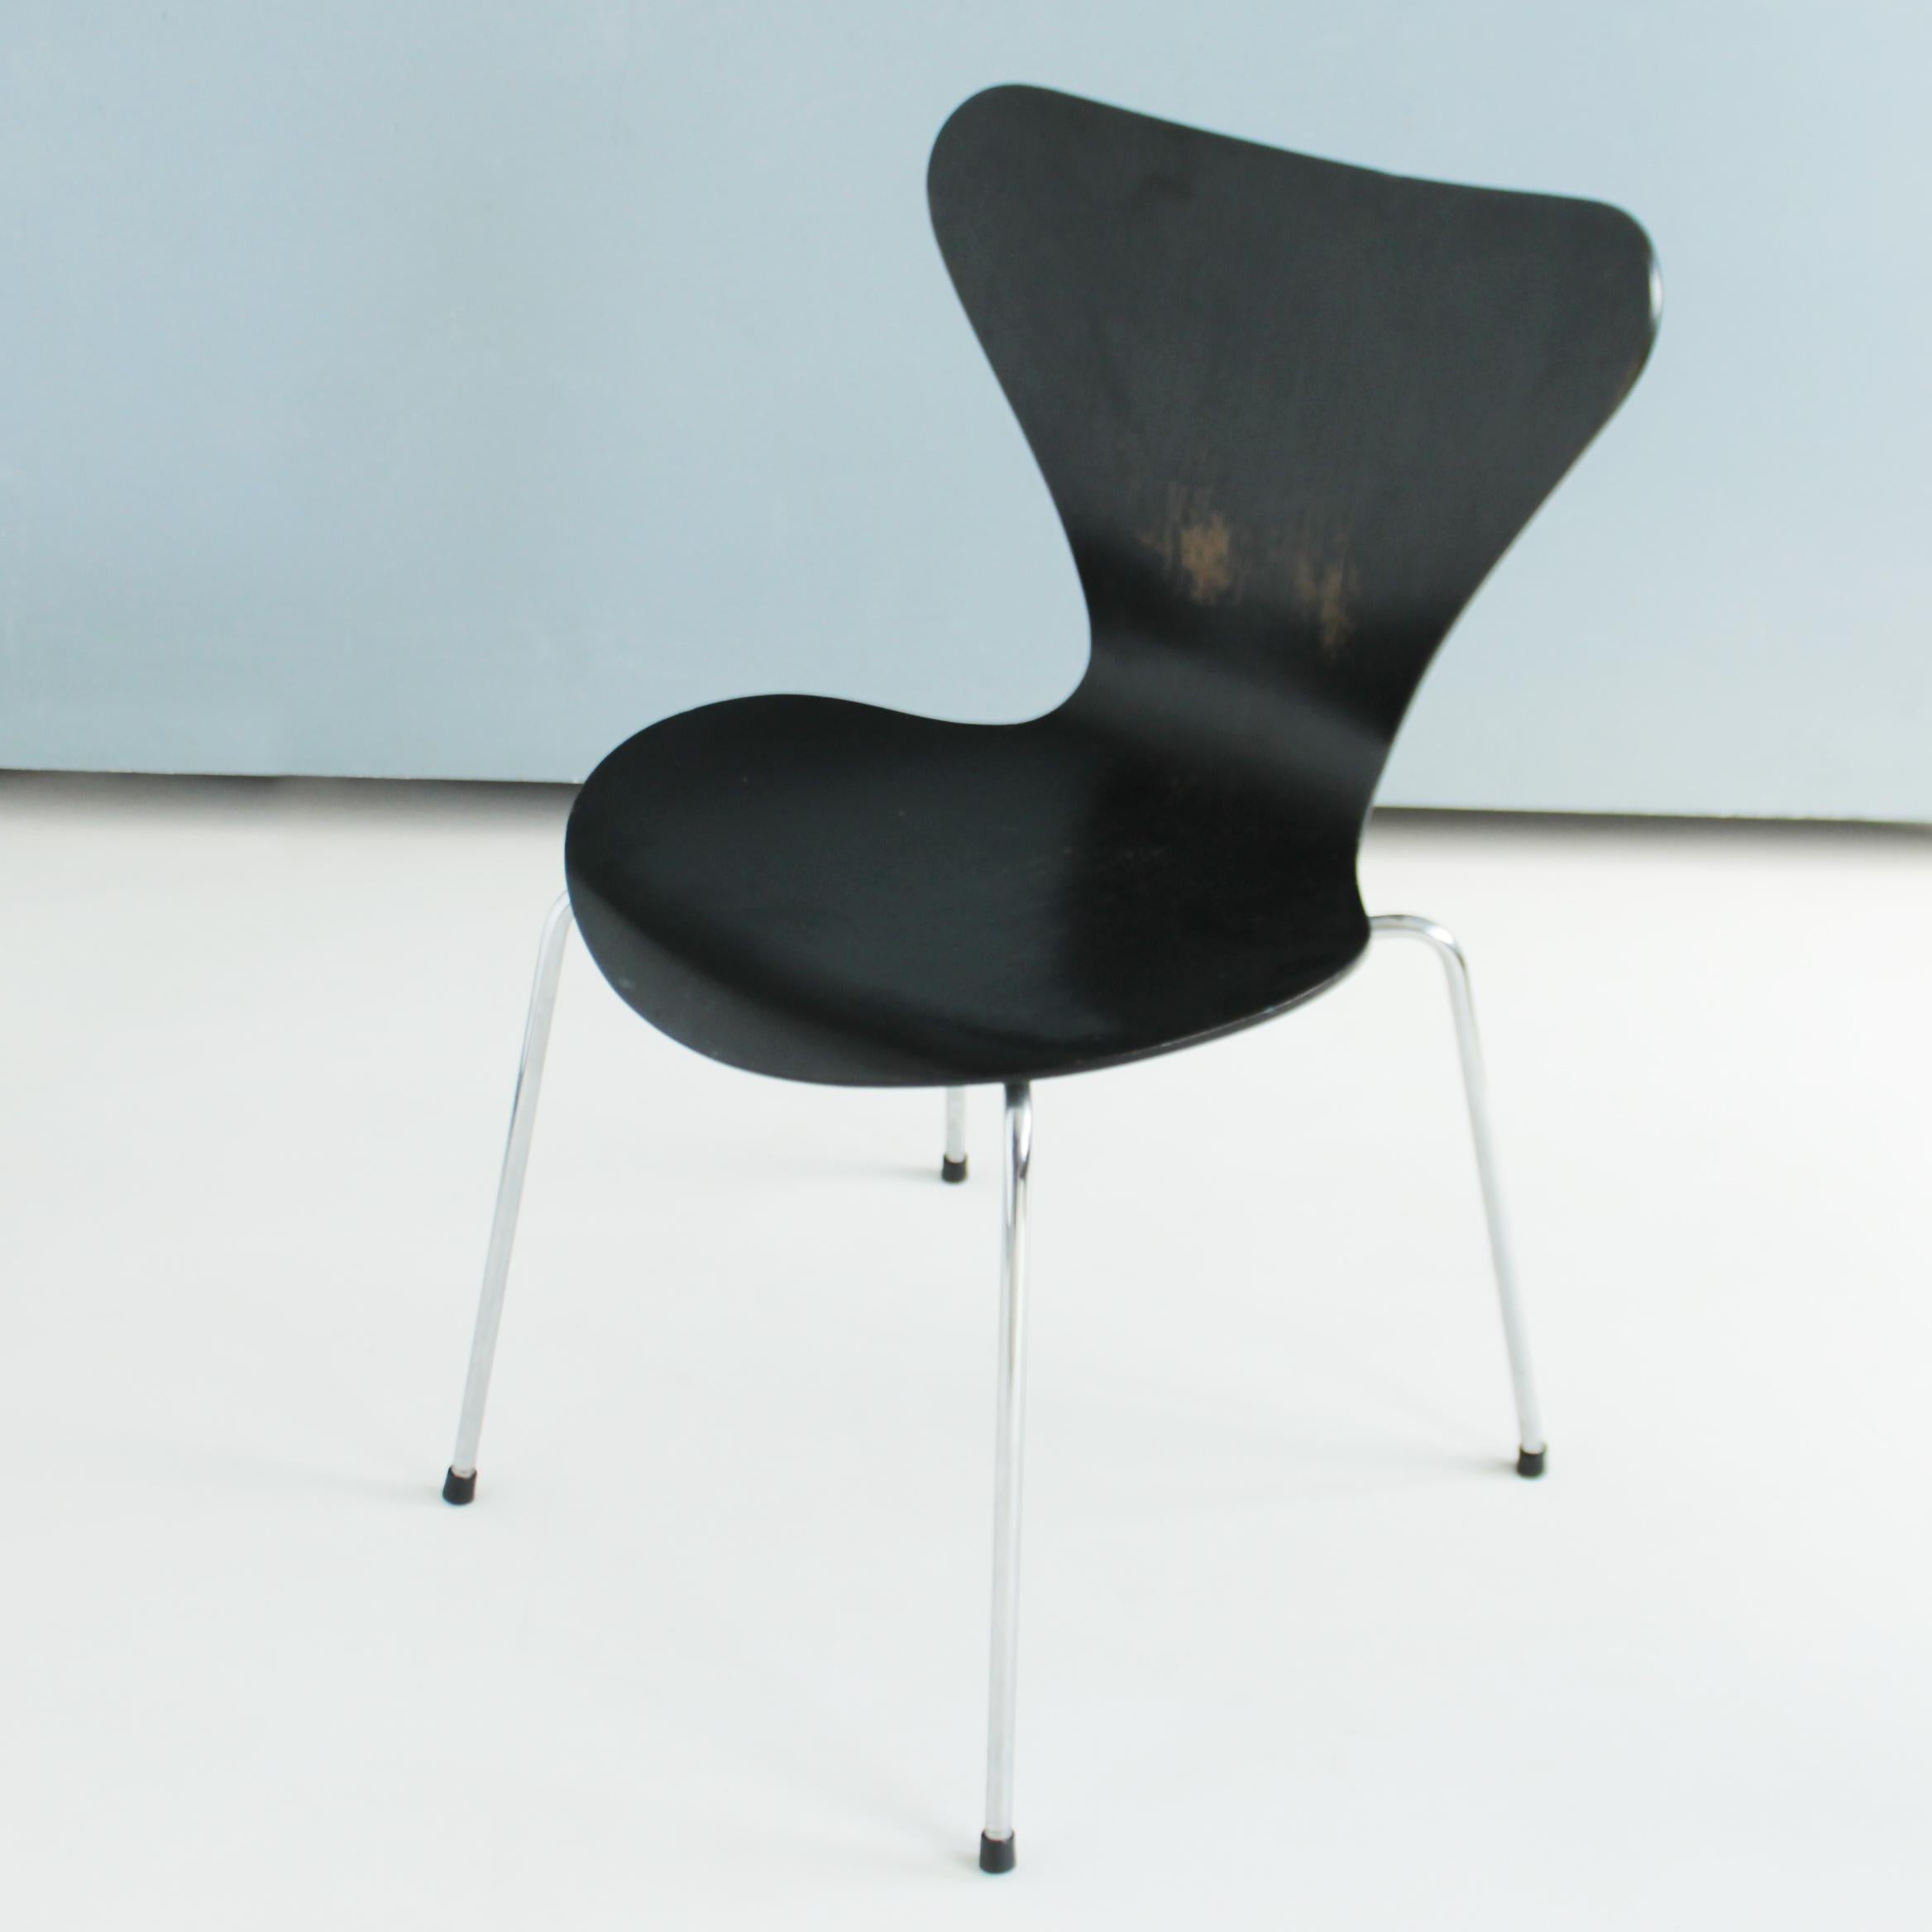 Stained Arne Jacobsen Series 7 Chairs by Fritz Hansen